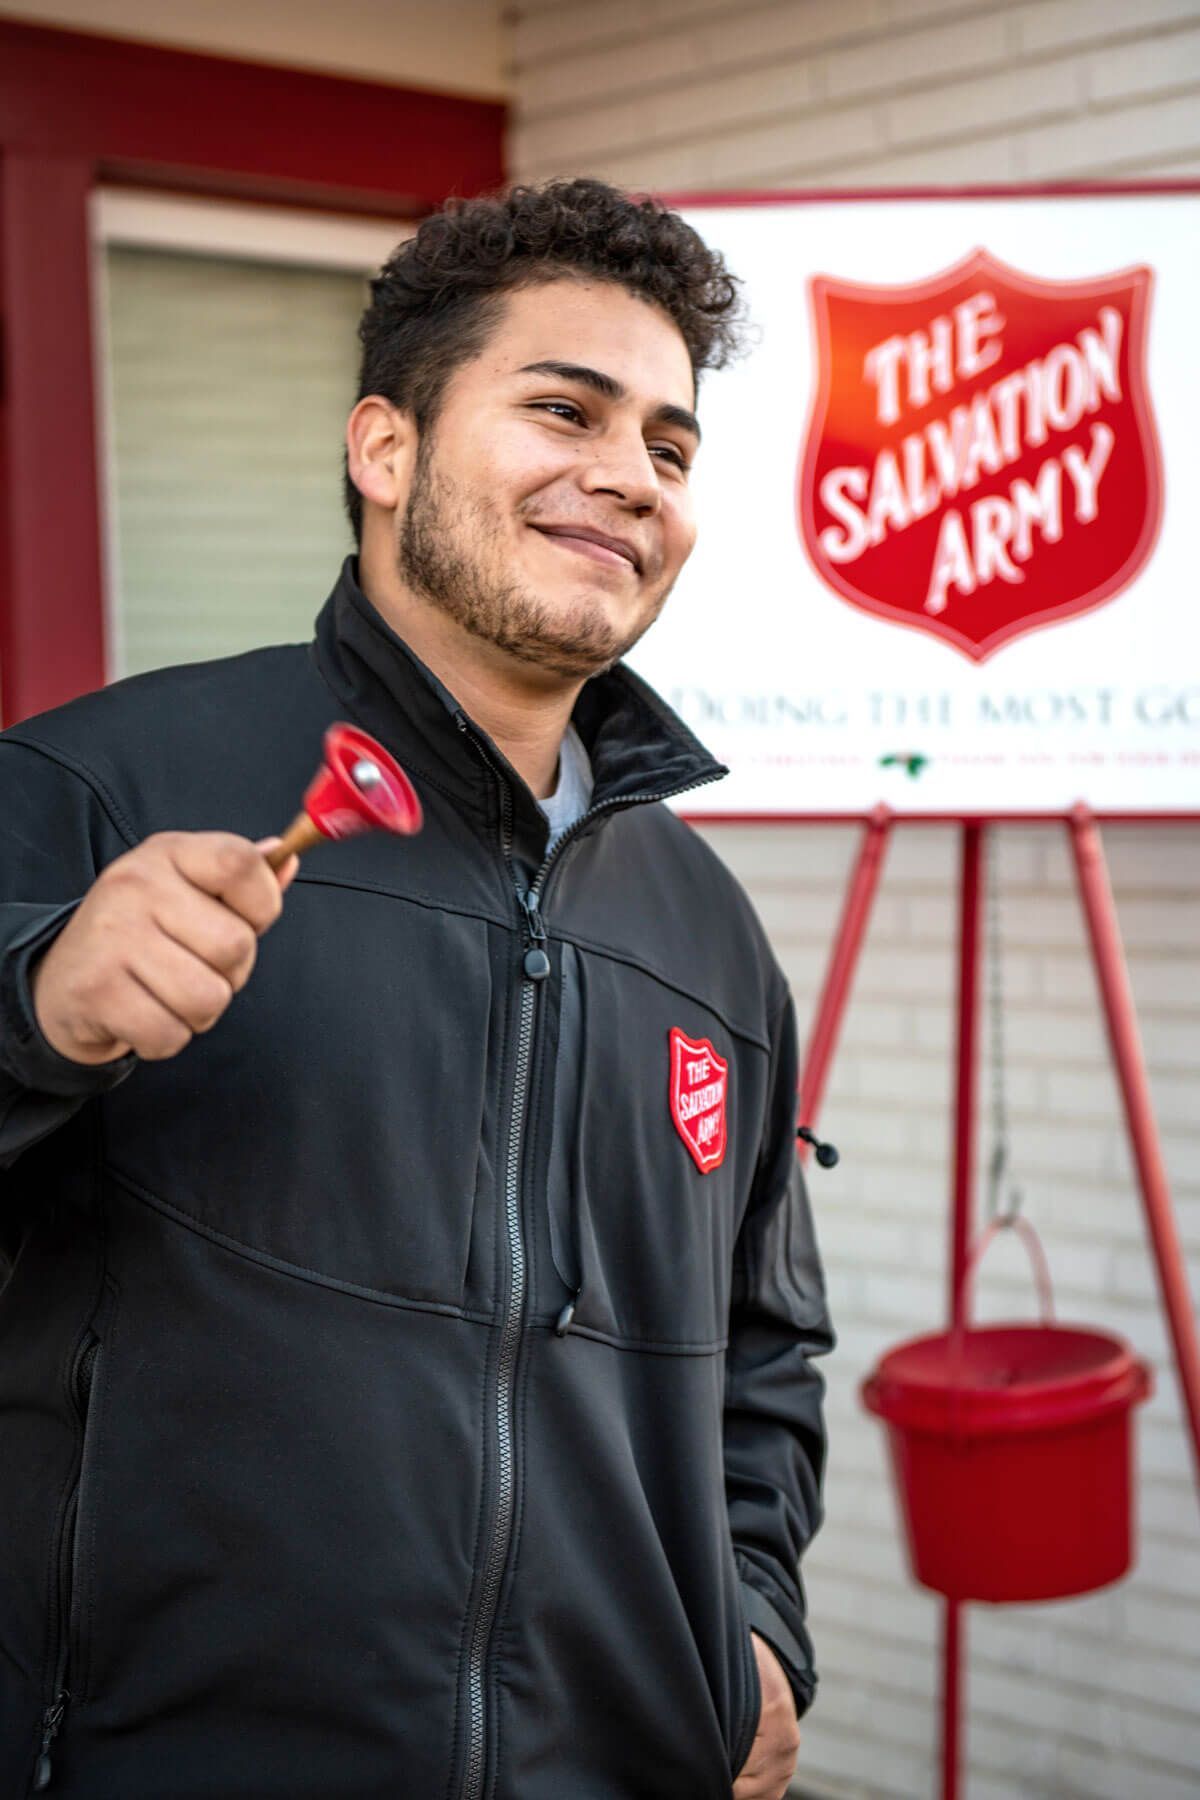 young man ringing bell for charity donations